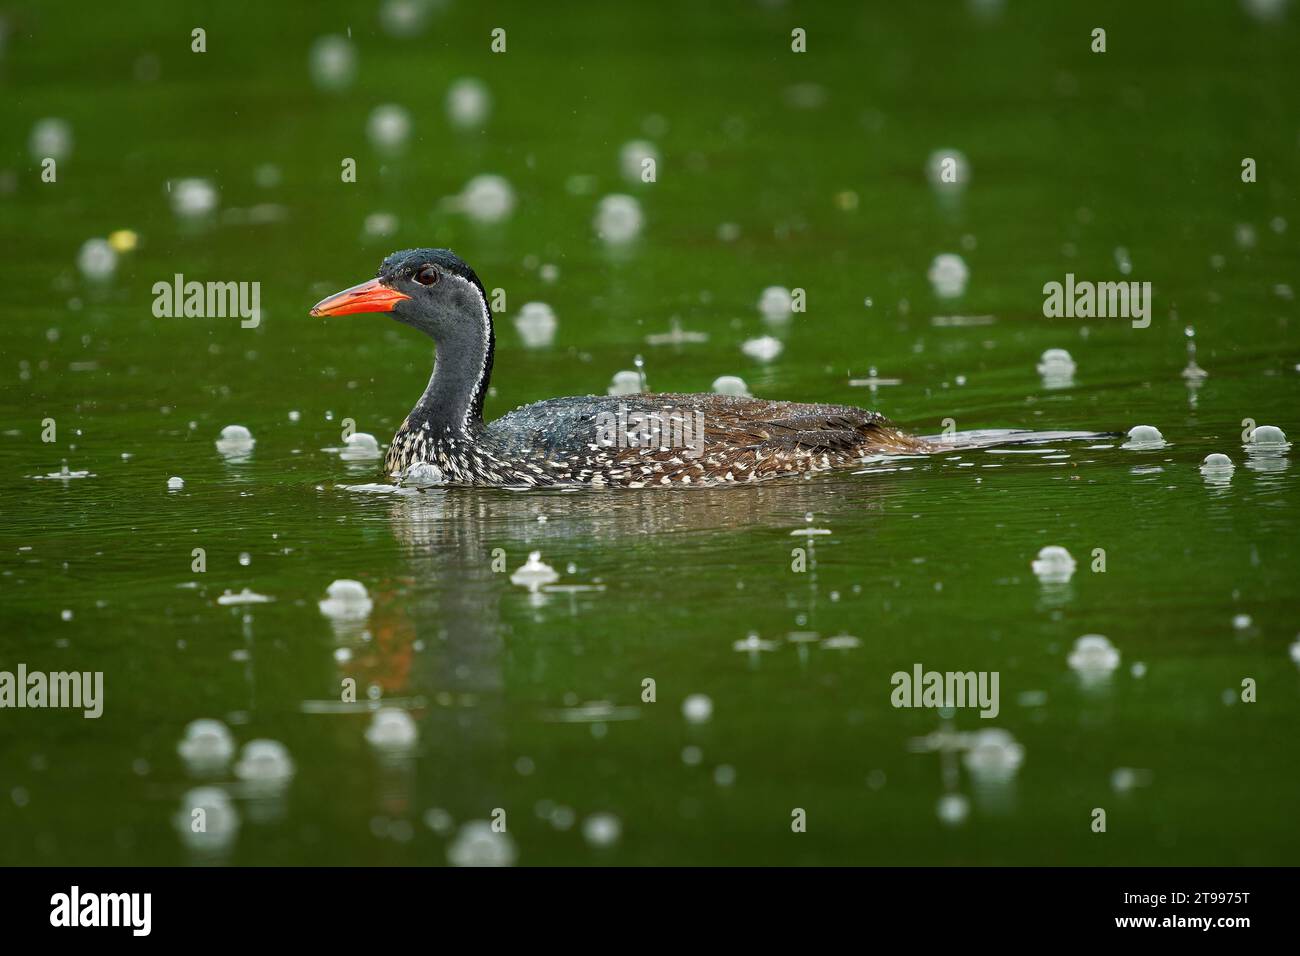 African finfoot - Podica senegalensis aquatic bird from Heliornithidae (the finfoots and sungrebe), rivers and lakes of Africa, water bird swimming in Stock Photo